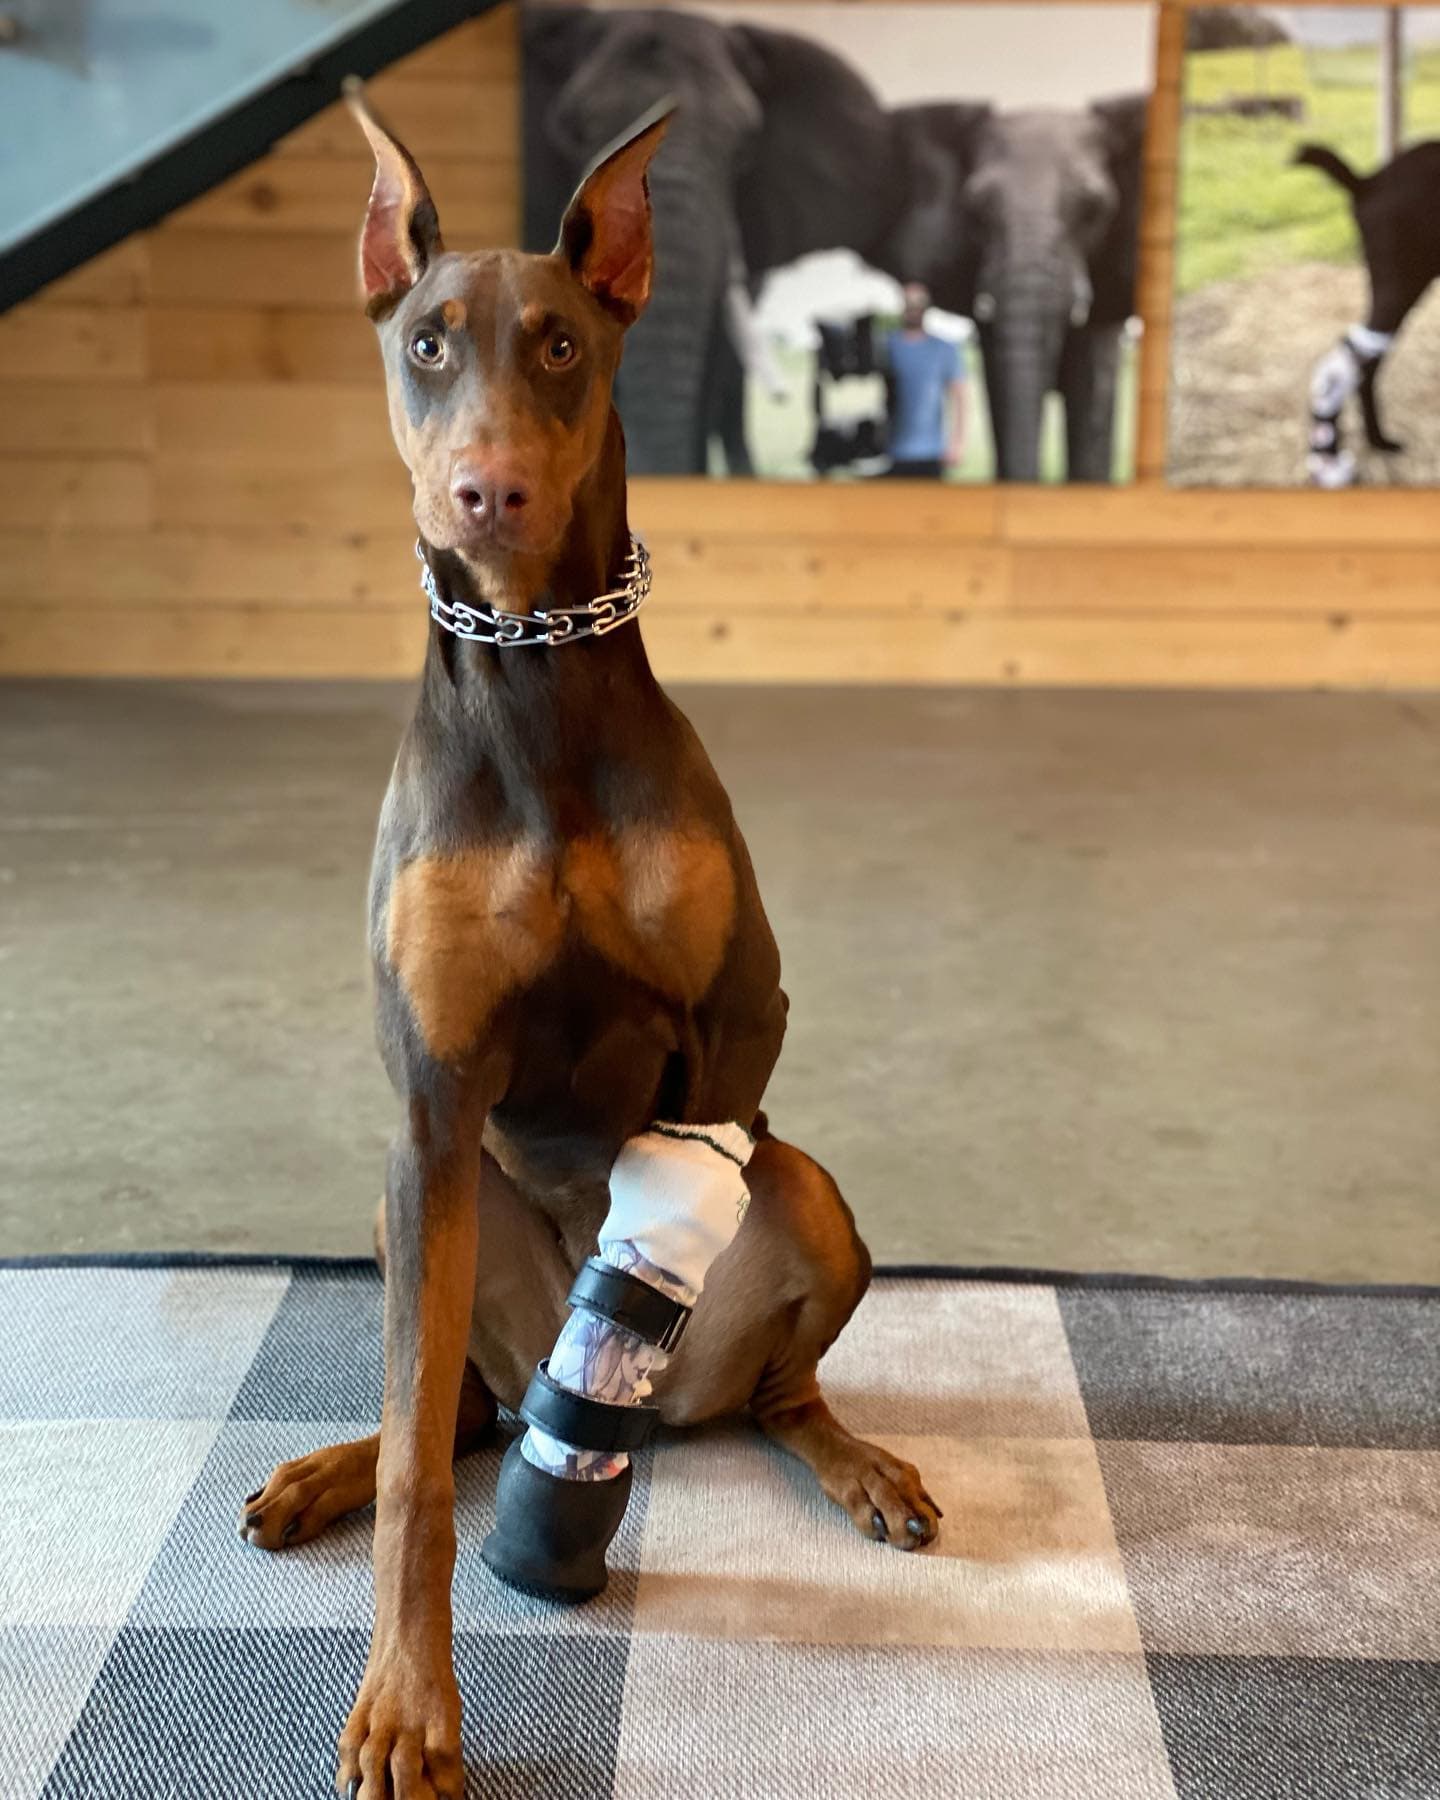 Dog with a pet prosthetic leg.